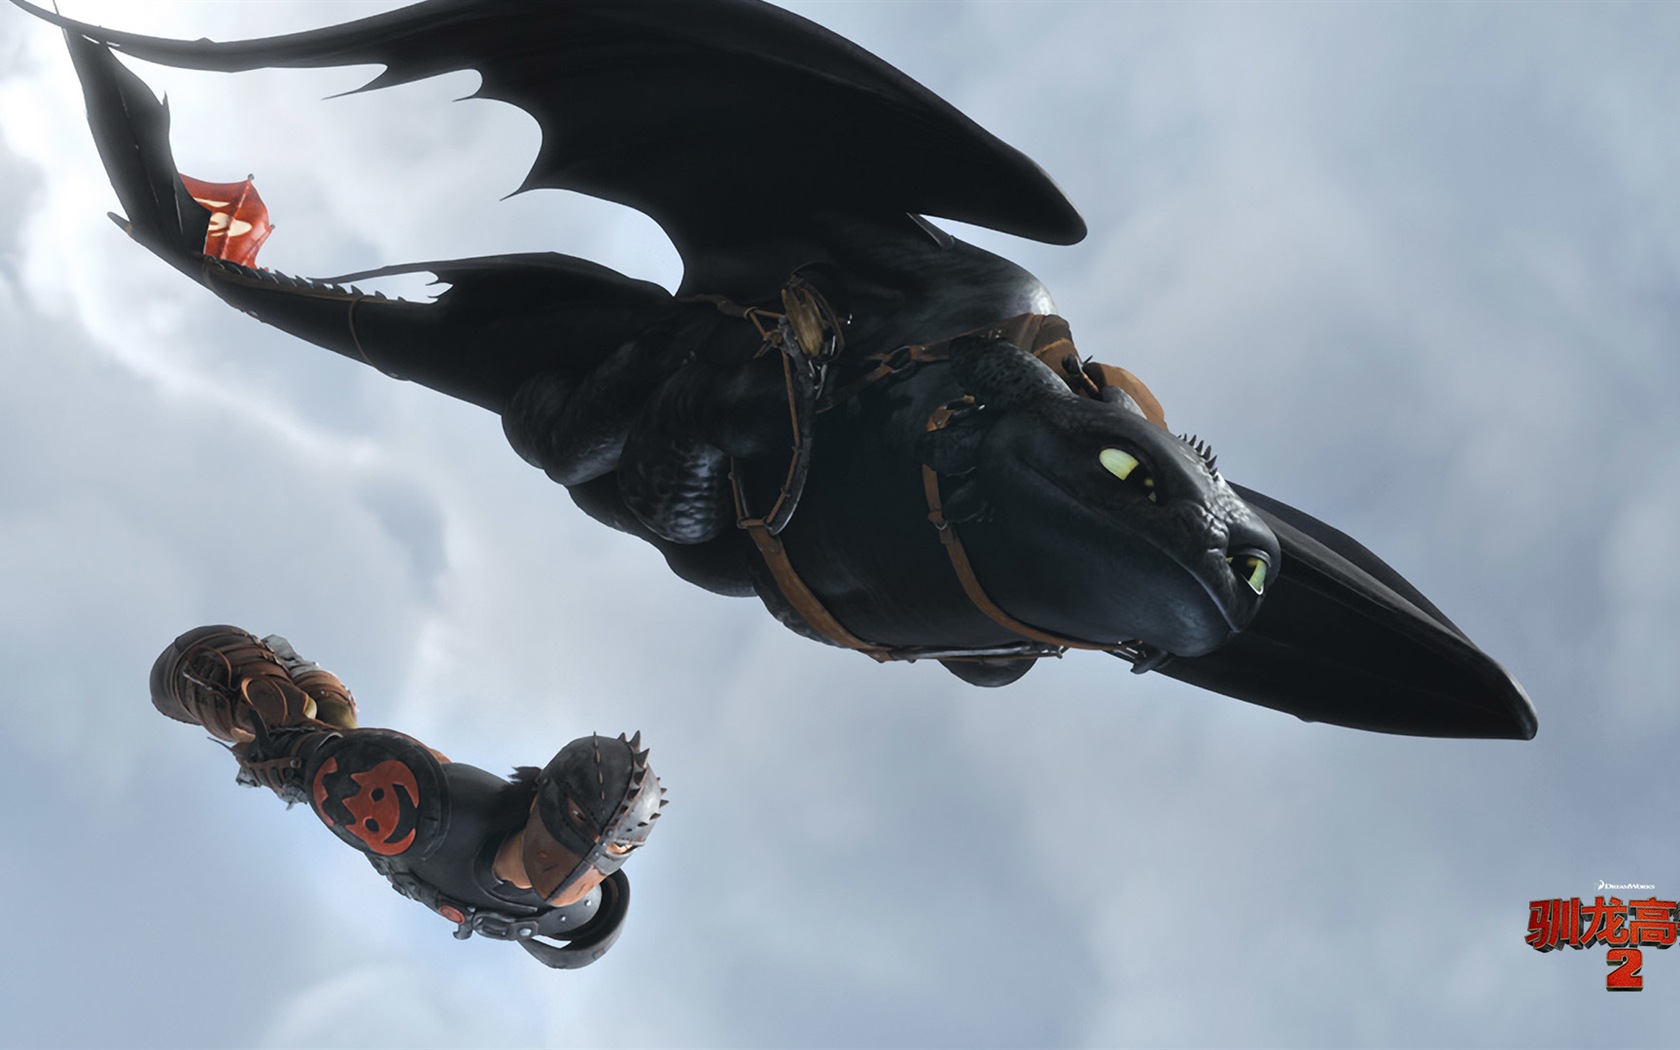 How to Train Your Dragon 2 驯龙高手2 高清壁纸6 - 1680x1050